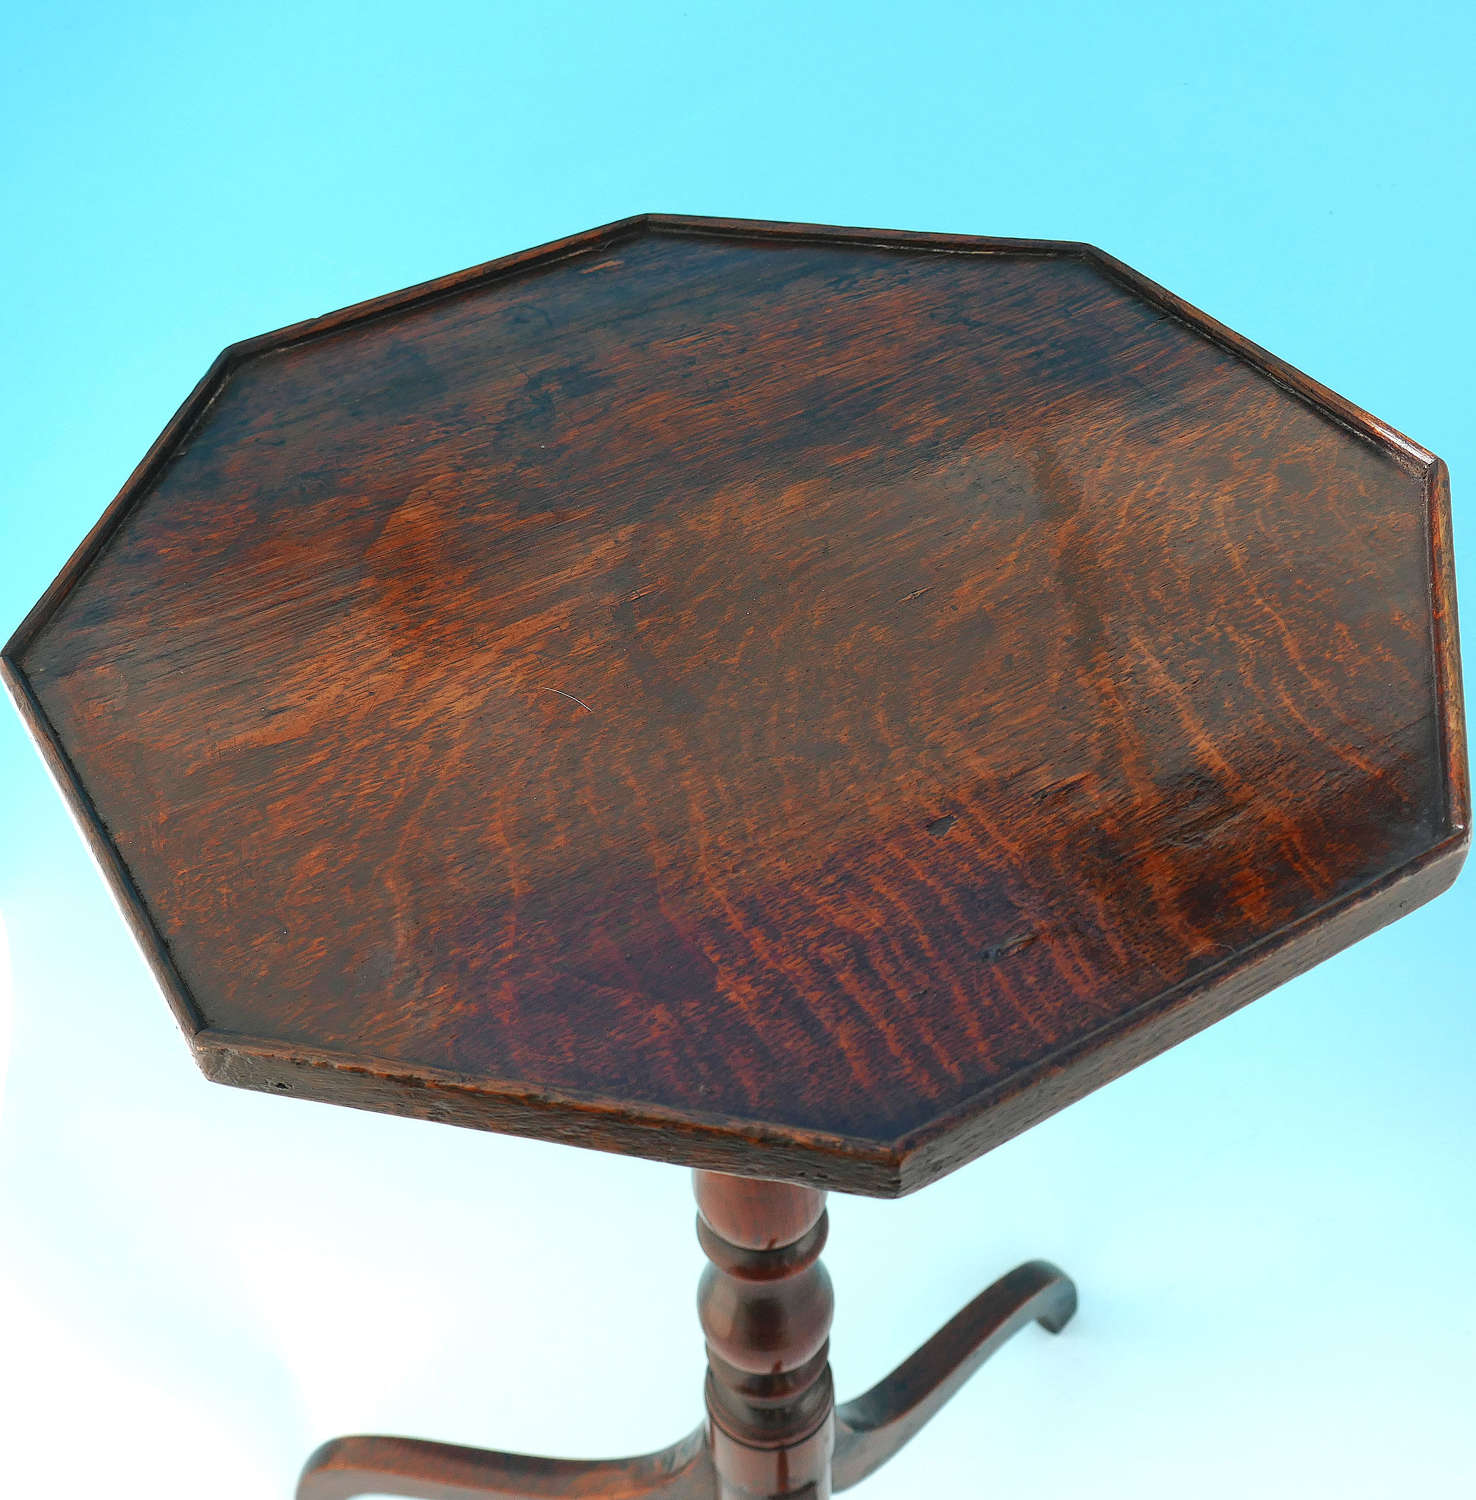 19thc Country Furniture English Oak Candlestand With Octagonal Top.